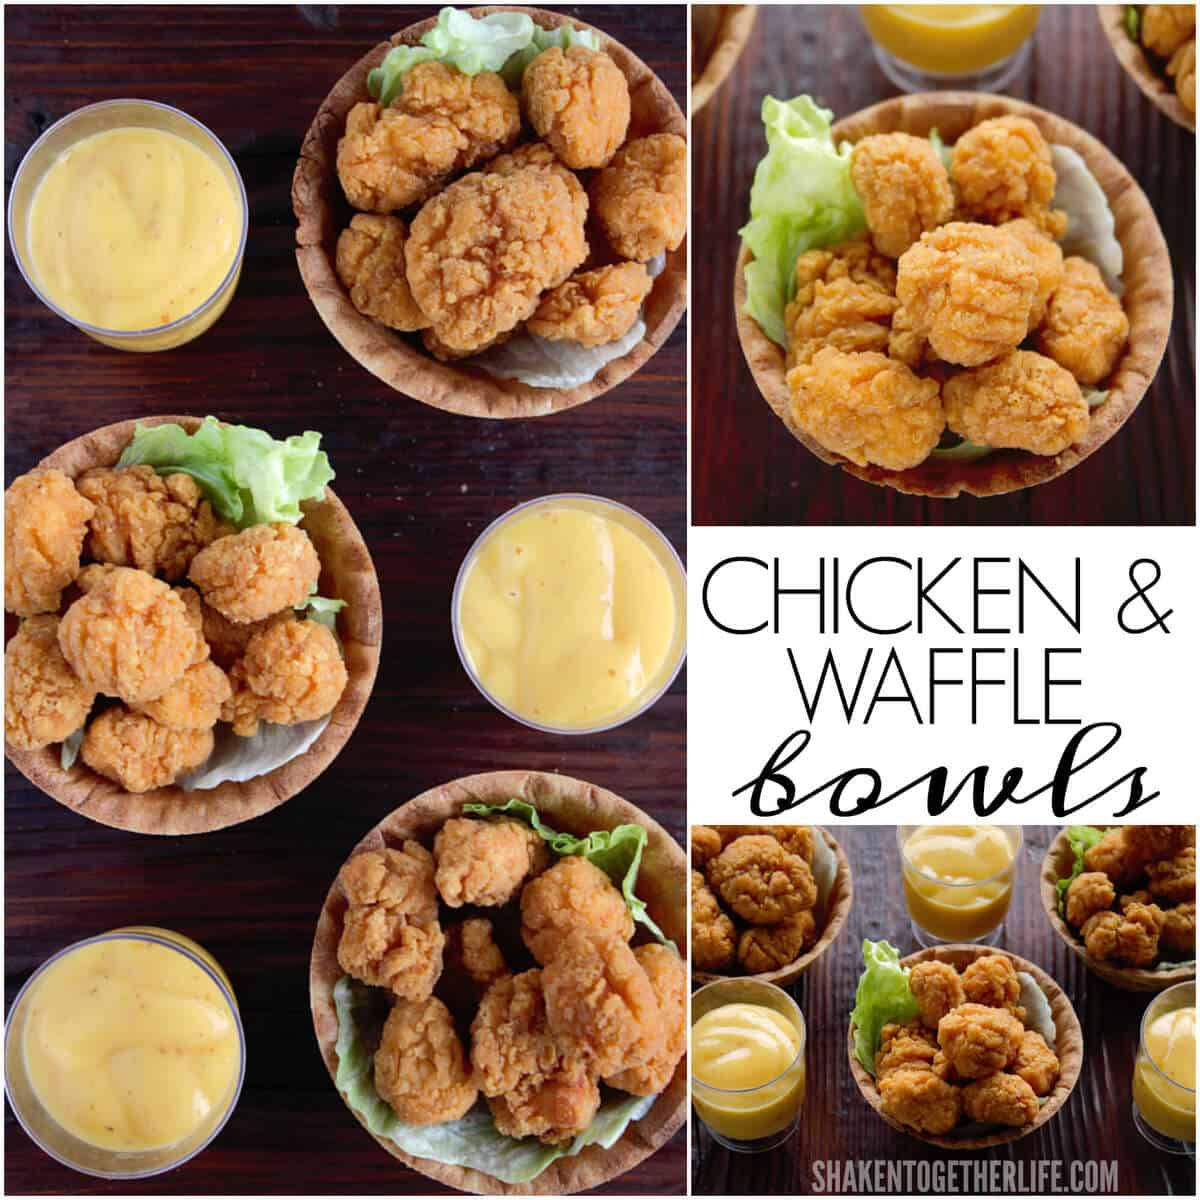 Chicken & Waffle Bowls are a delicious mix of sweet and salty and they are beyond easy to assemble!